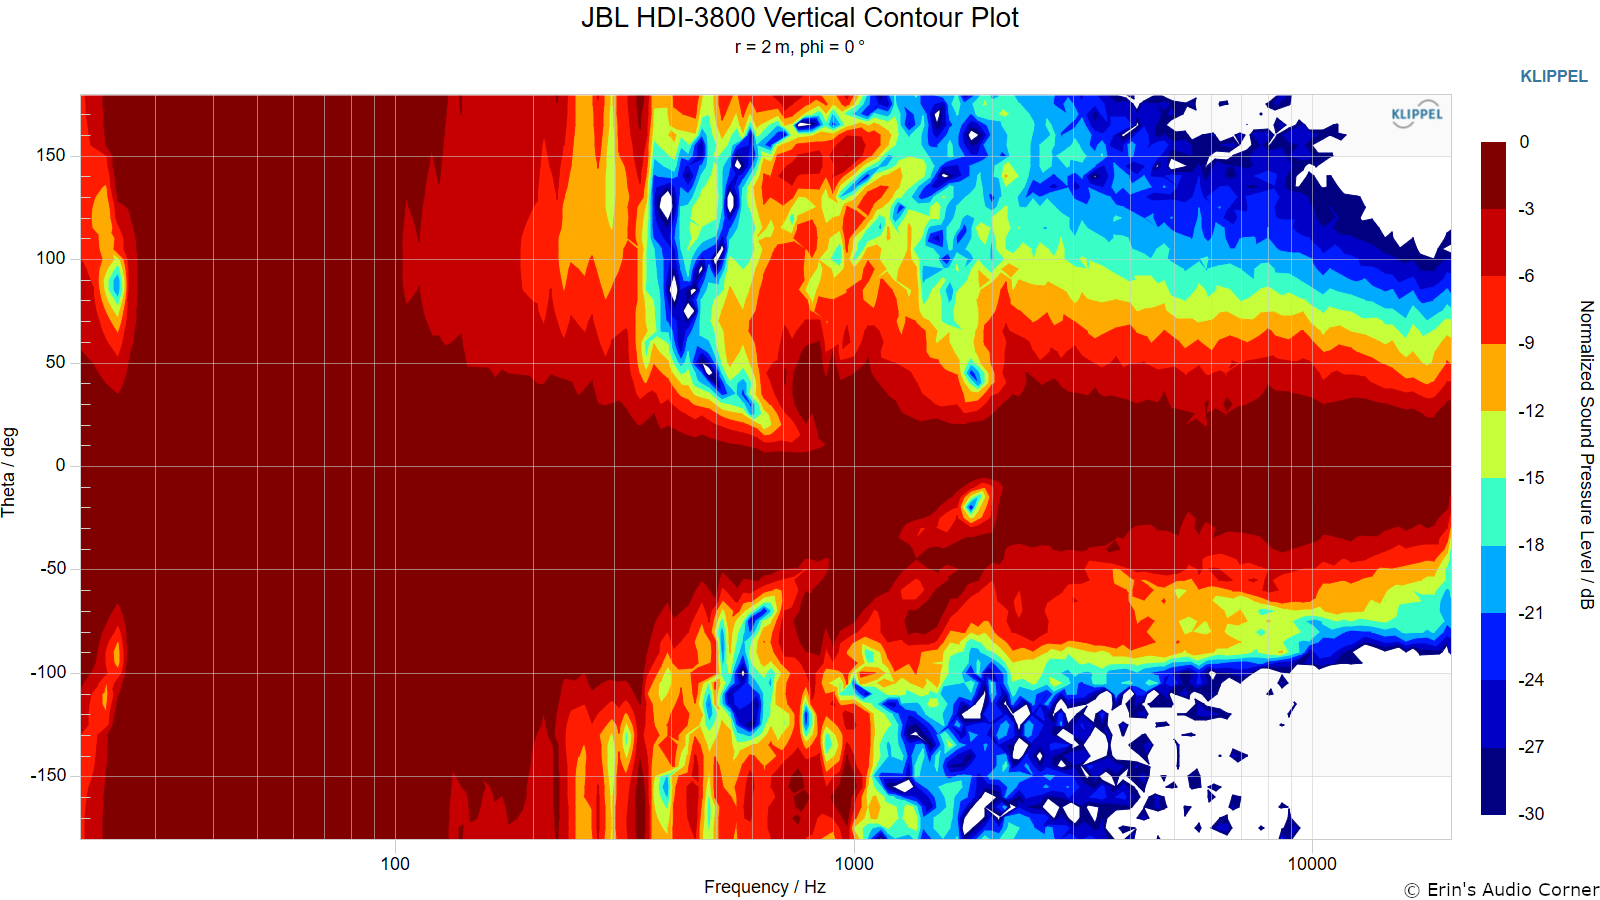 JBL%20HDI-3800%20Vertical%20Contour%20Plot%20%28normalized%29.png